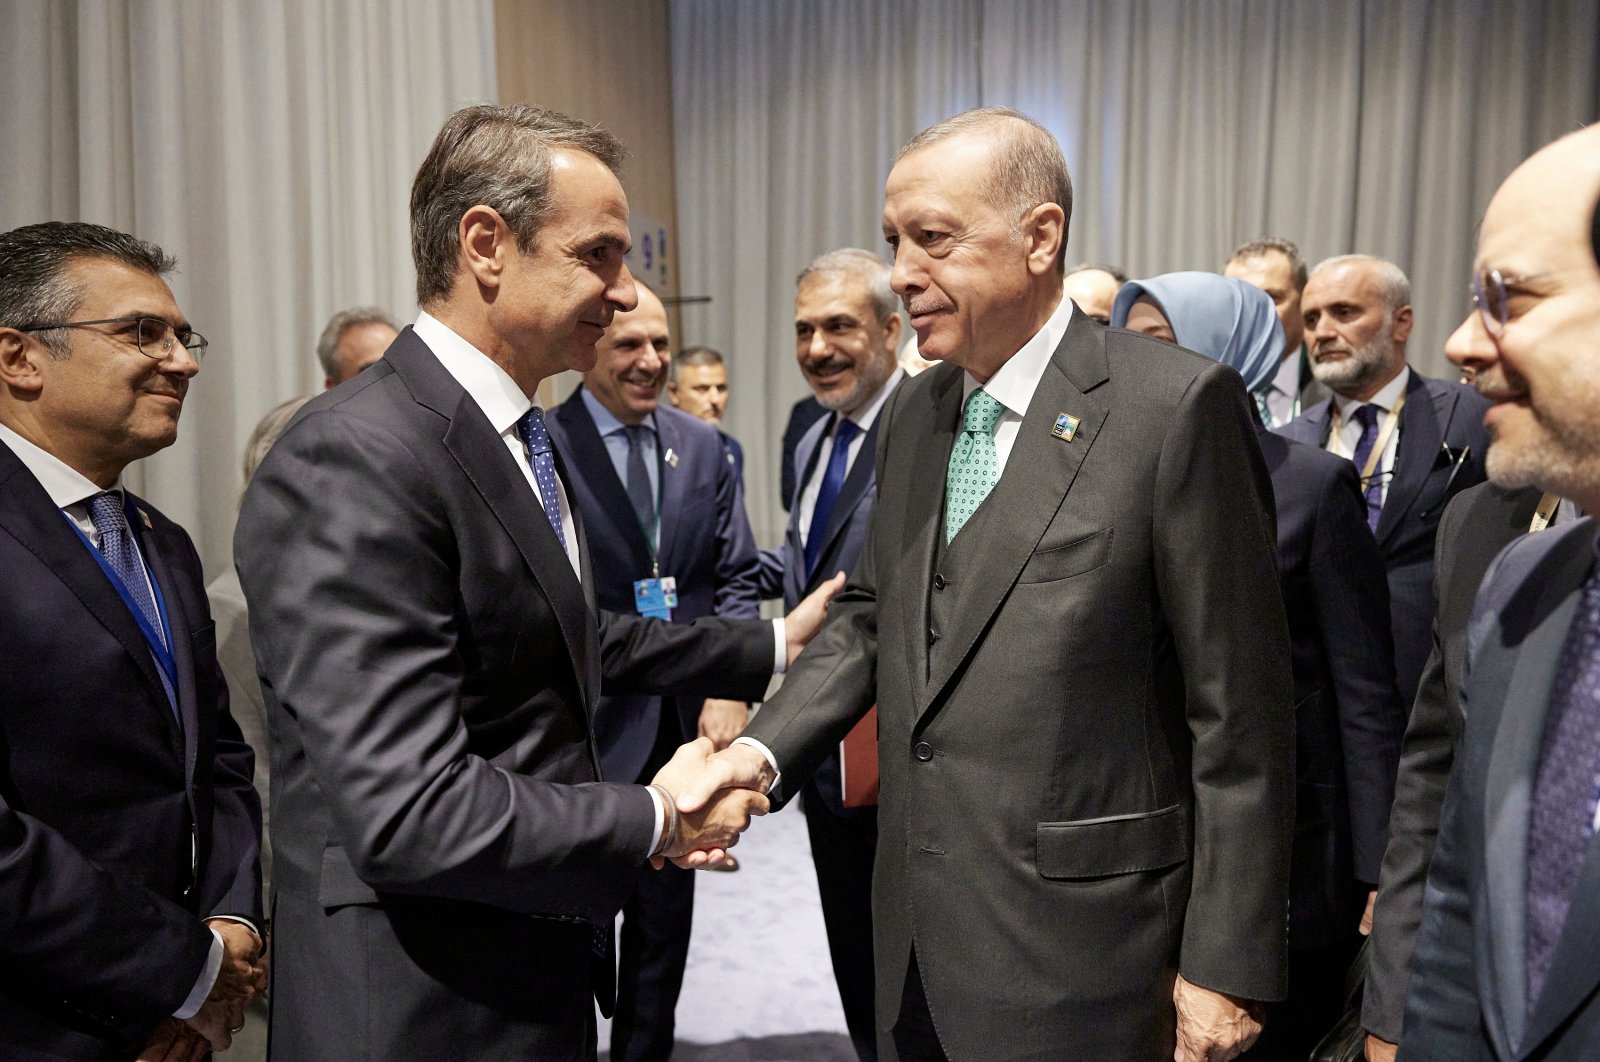 Greek Prime Minister Kyriakos Mitsotakis meets with President Tayyip Erdoğan (R) during a NATO leaders summit in Vilnius, Lithuania, July 12, 2023. (Reuters Photo)